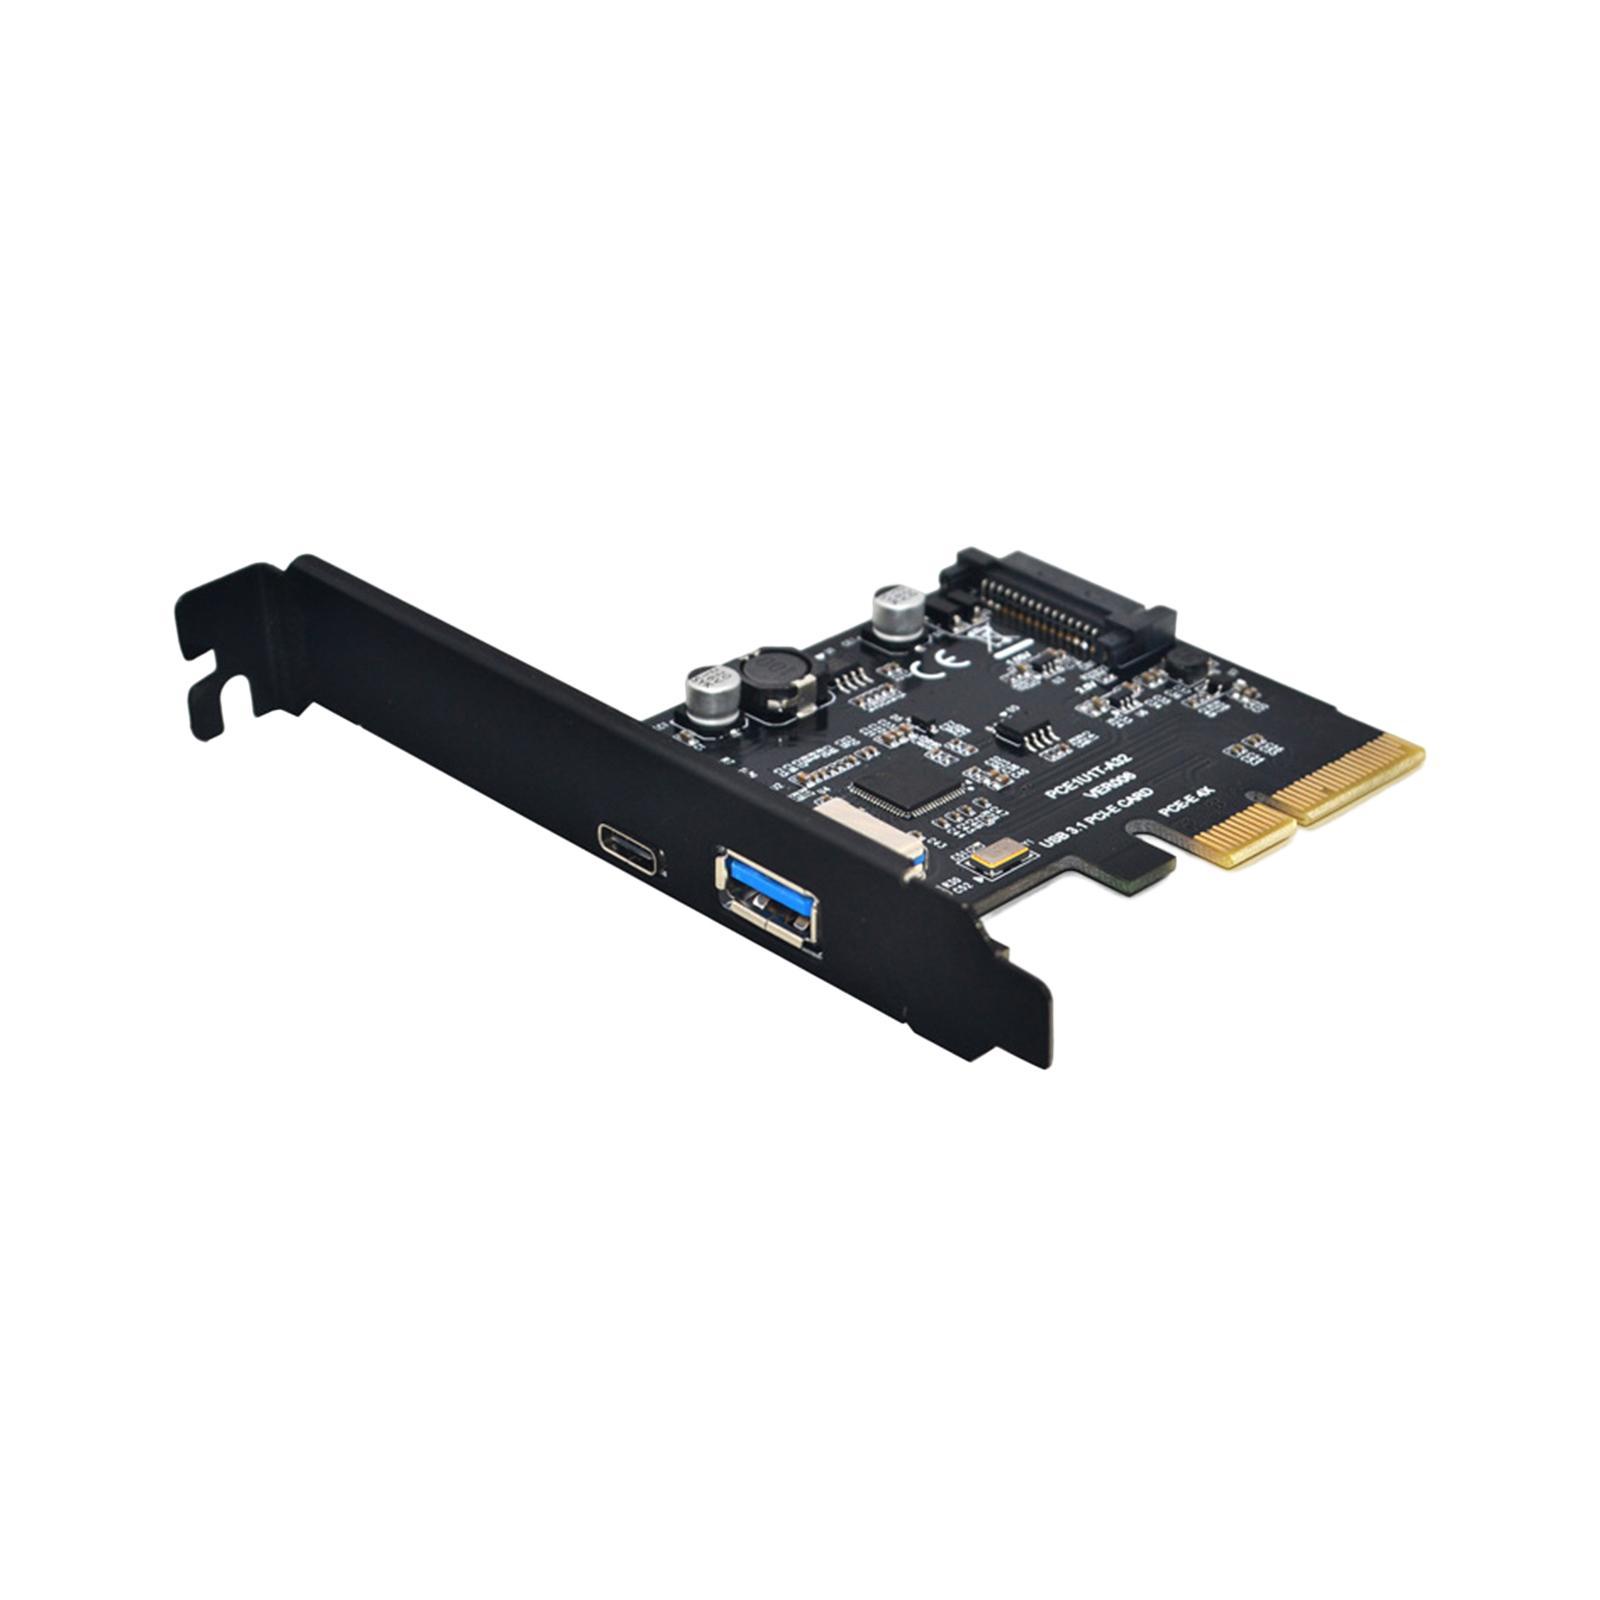 Pci-e to USB 3.1  10 Gbps USB A + USB C Expansion Card Components Easy to Install High Performance  Adapter Card for Computer